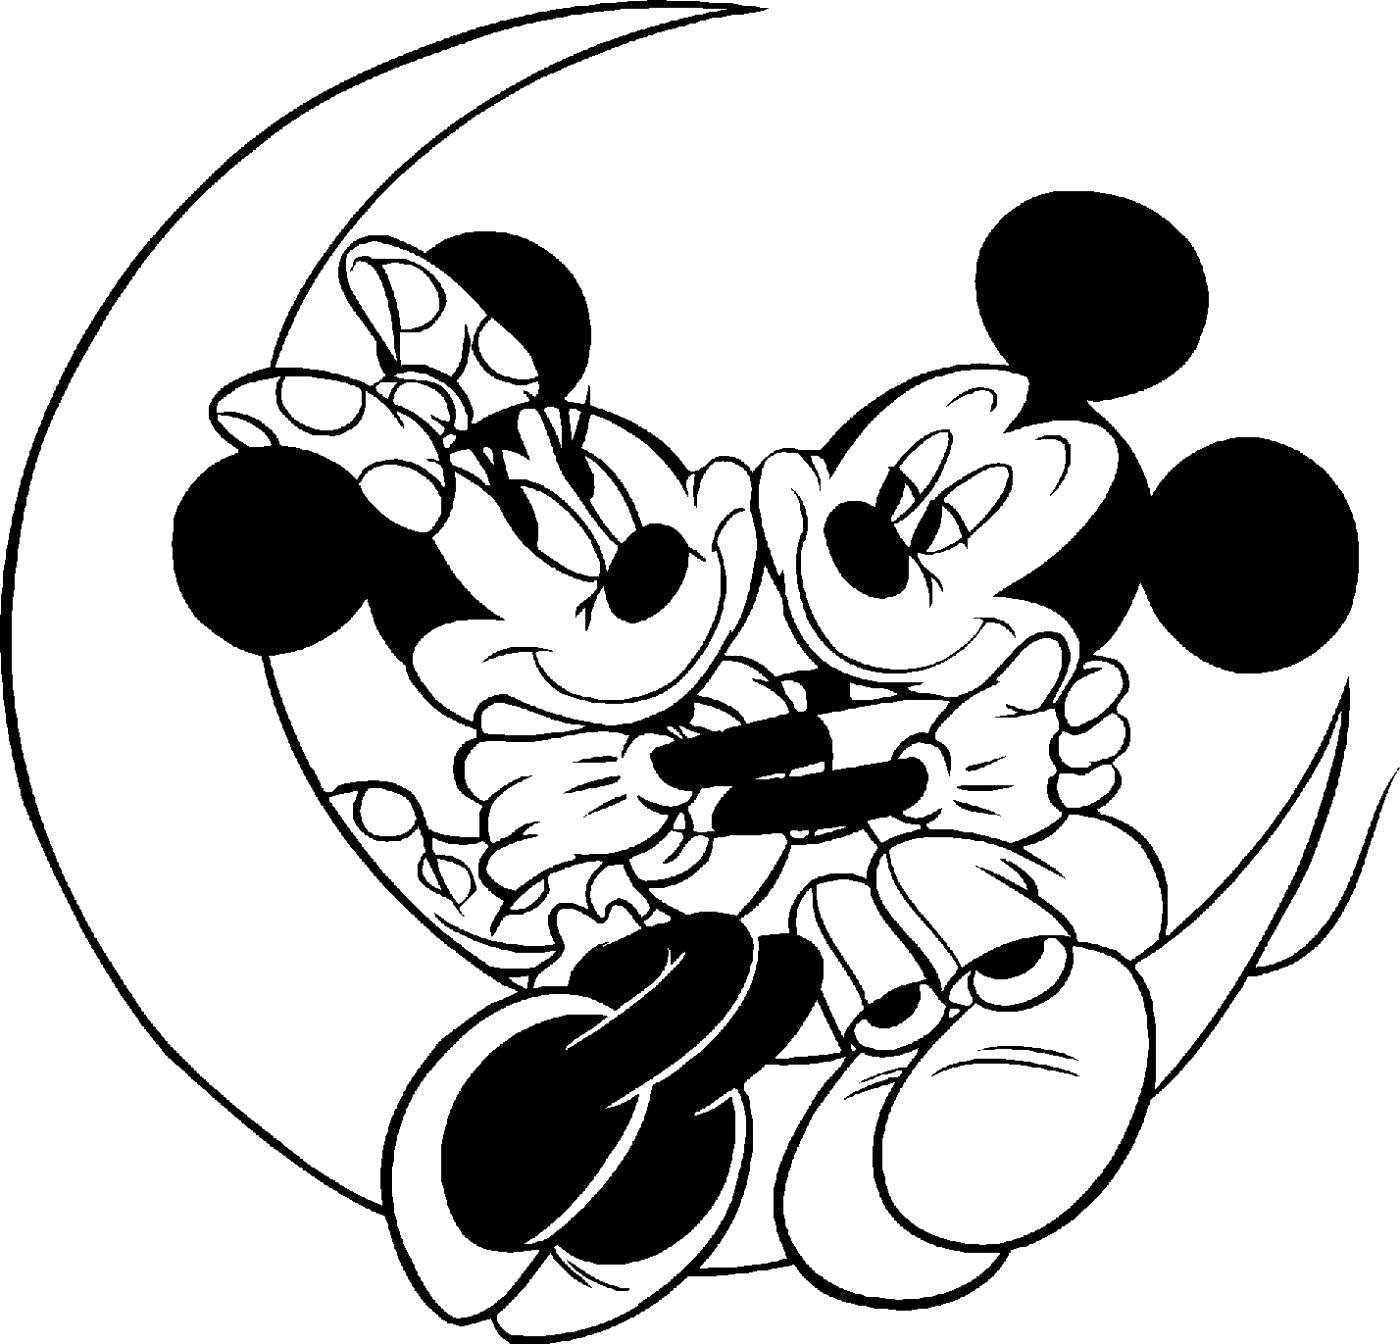 Coloring Minnie mouse and Mickey mouse hugging at the Crescent. Category Disney coloring pages. Tags:  Disney, Mickey Mouse, Minnie Mouse.